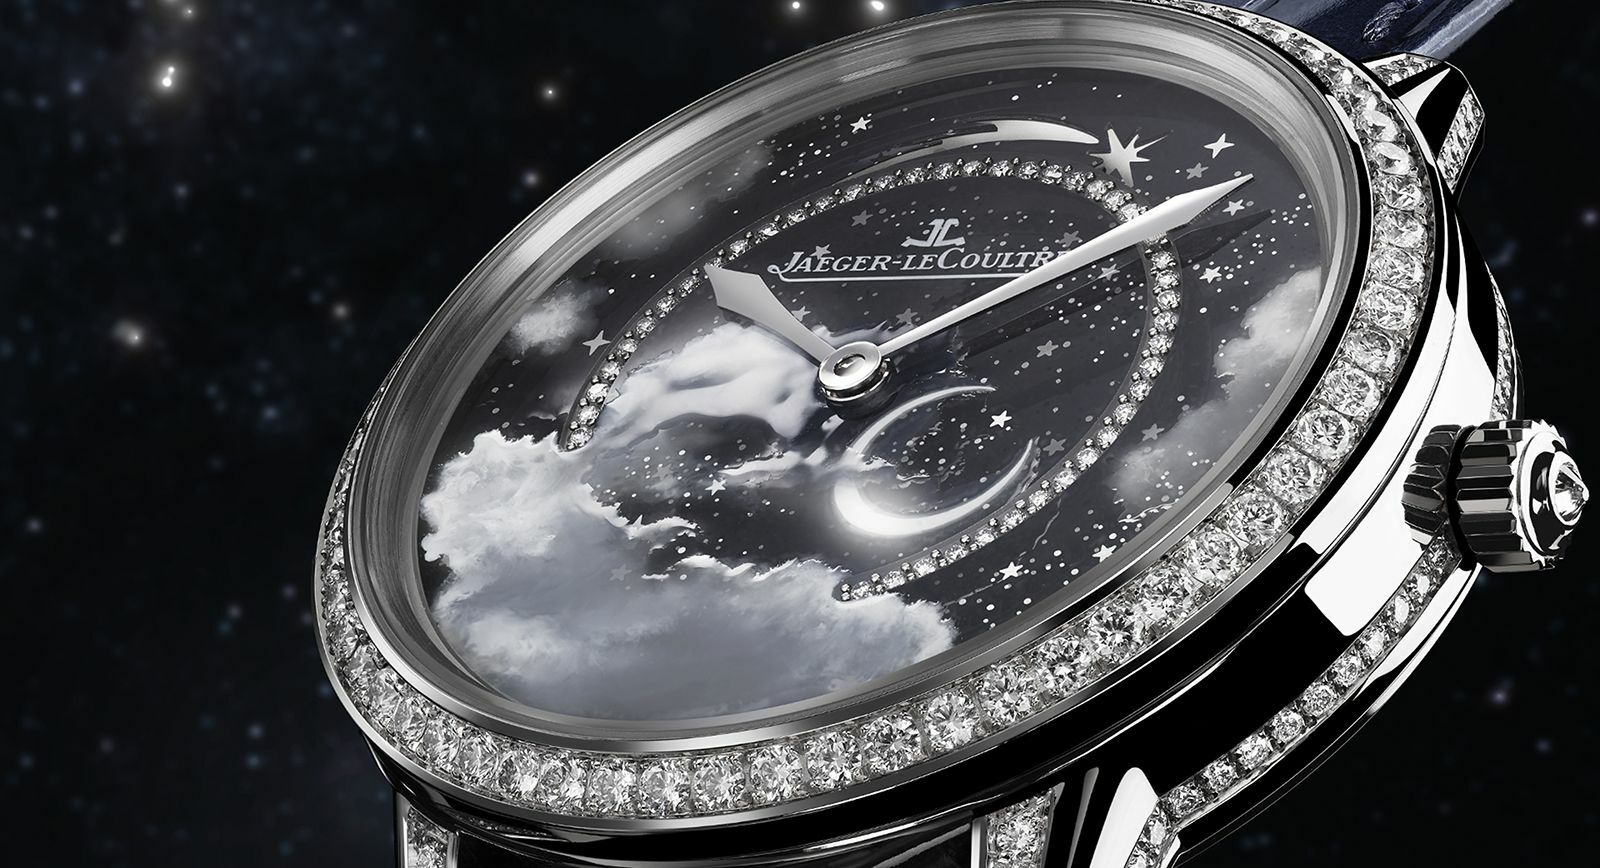 Jaeger-LeCoultre Rendez-Vous Star watch with a hand-painted night sky dial 